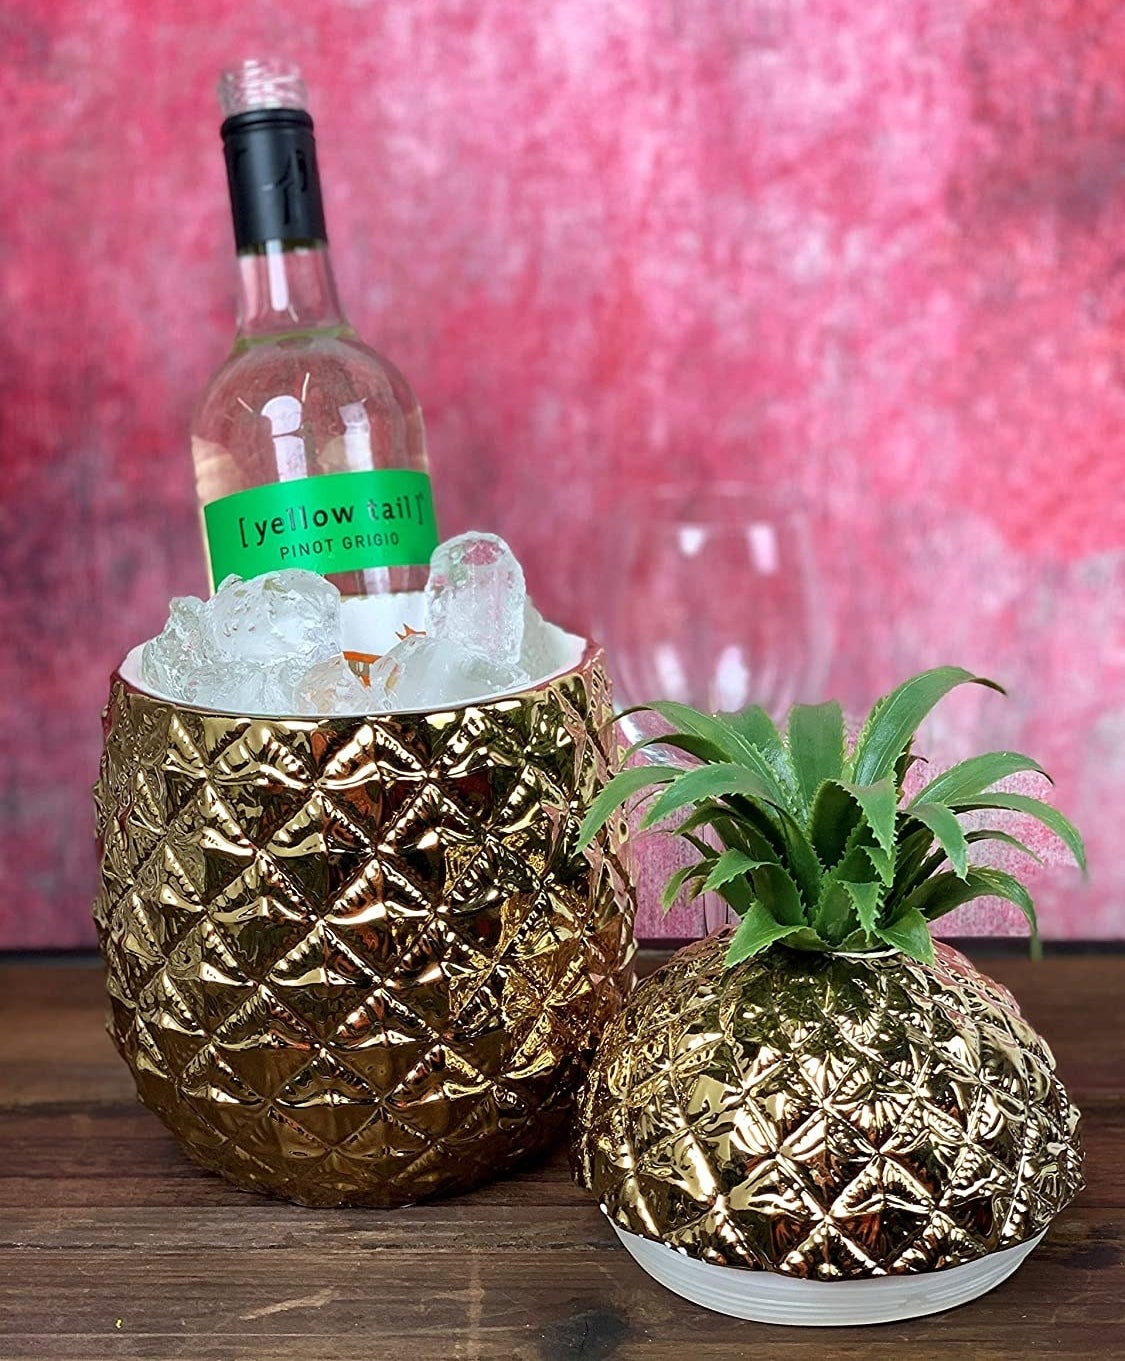 A large pineapple ice bucket chilling a bottle of wine